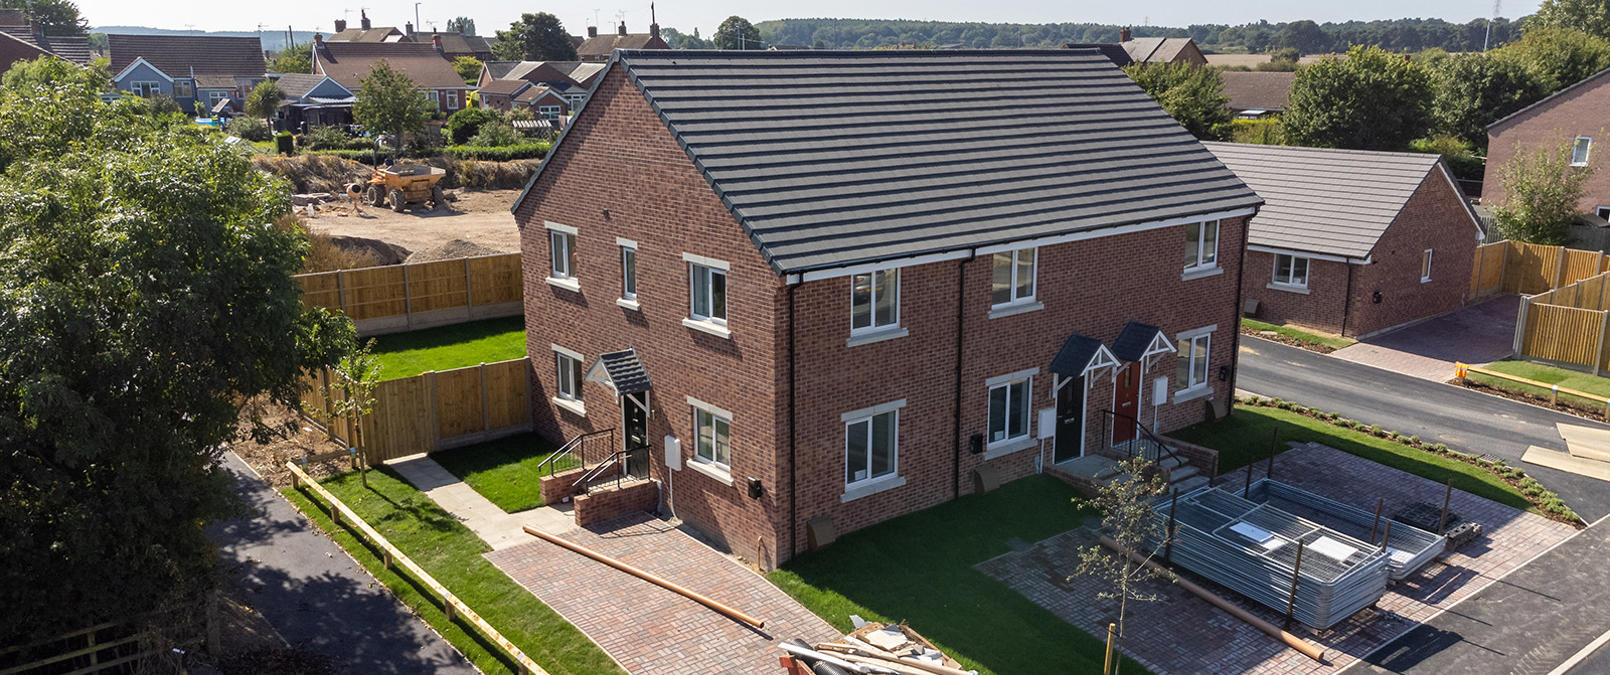 Shared Ownership Homes In Walesby